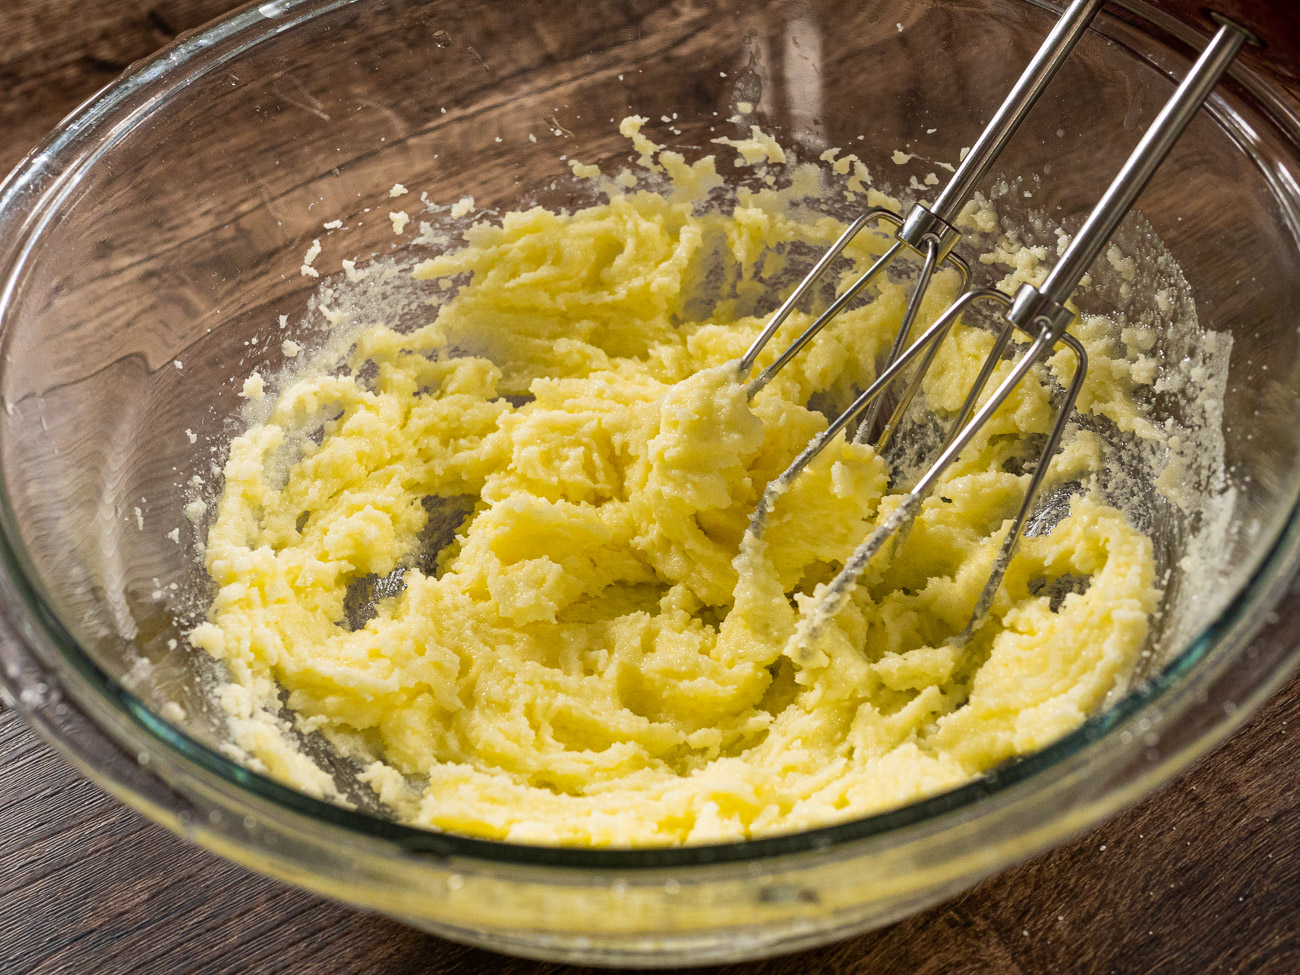 In a large bowl or stand mixer bowl cream together butter and sugar (4-5 minutes with an electric mixer on high).